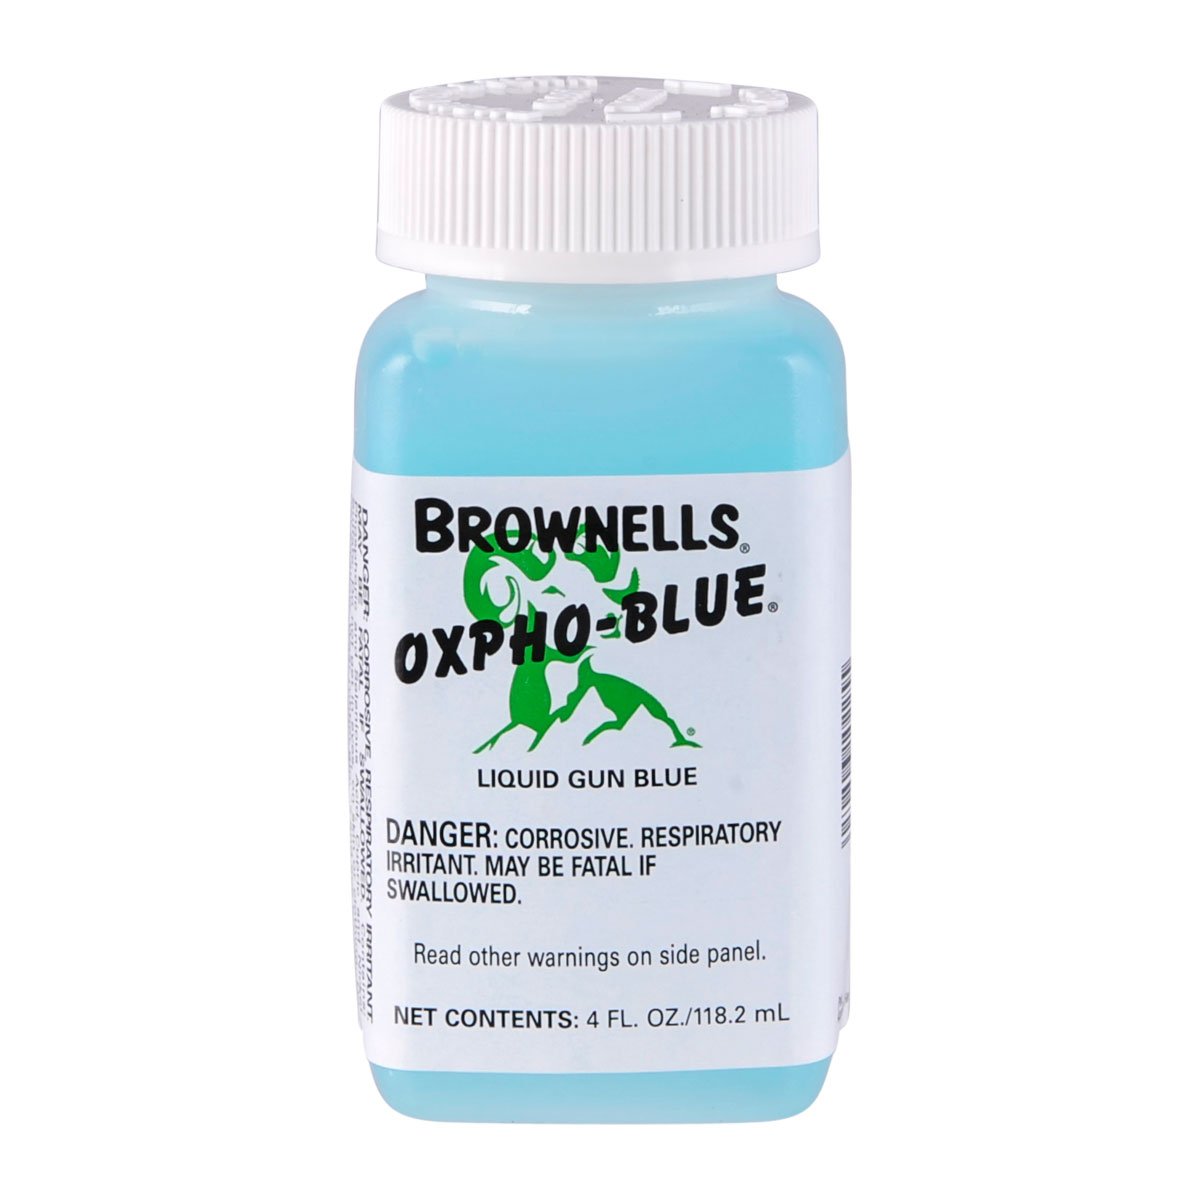 BROWNELLS - OXPHO-BLUE®